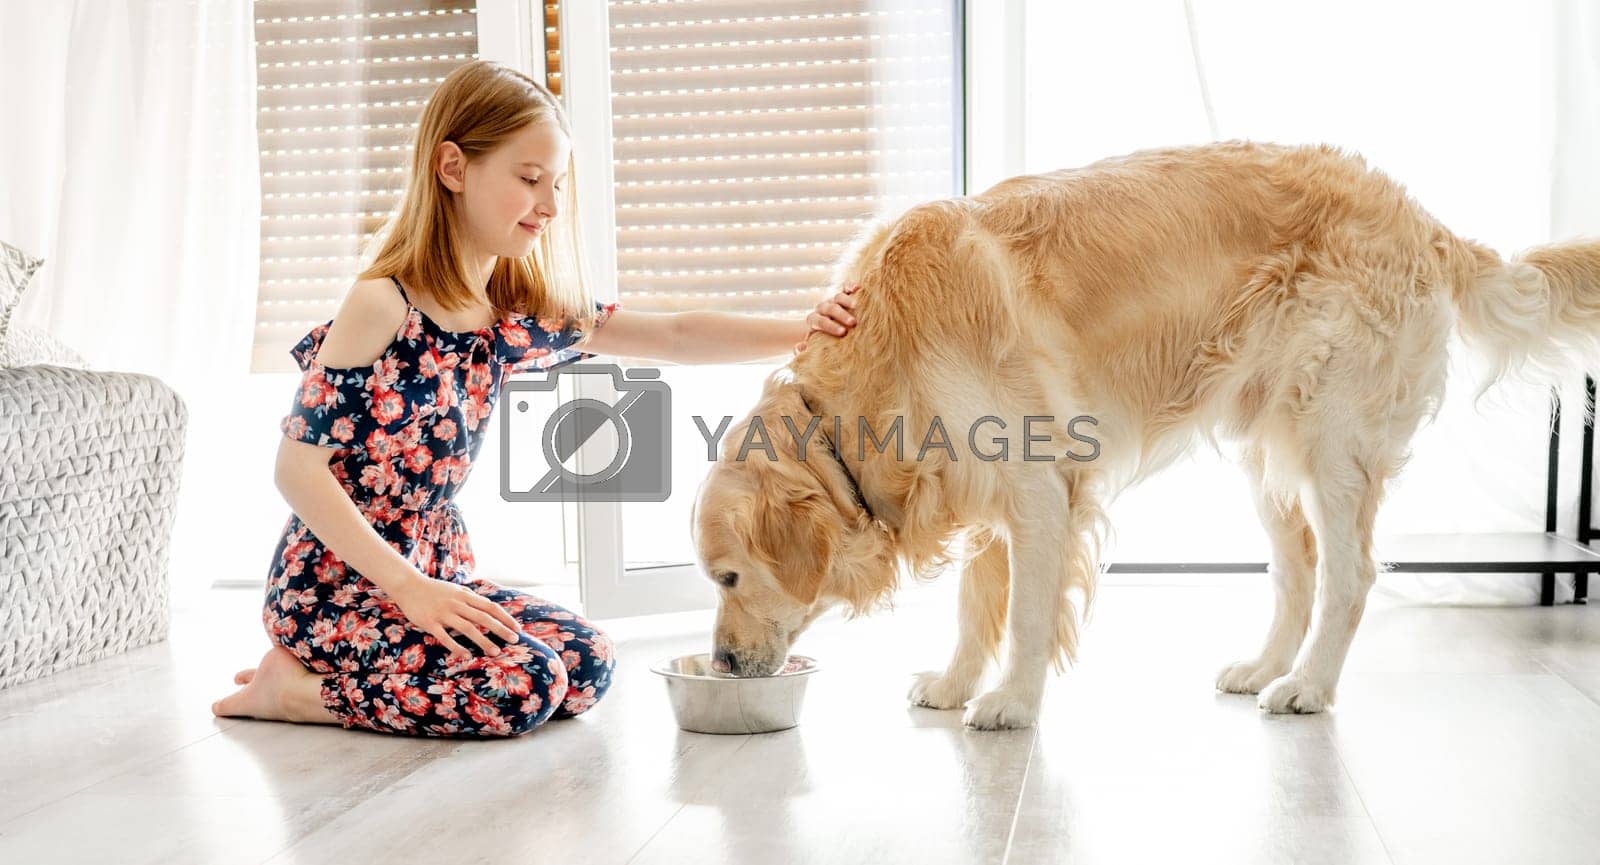 Royalty free image of Golden retriever dog eating food with girl by GekaSkr